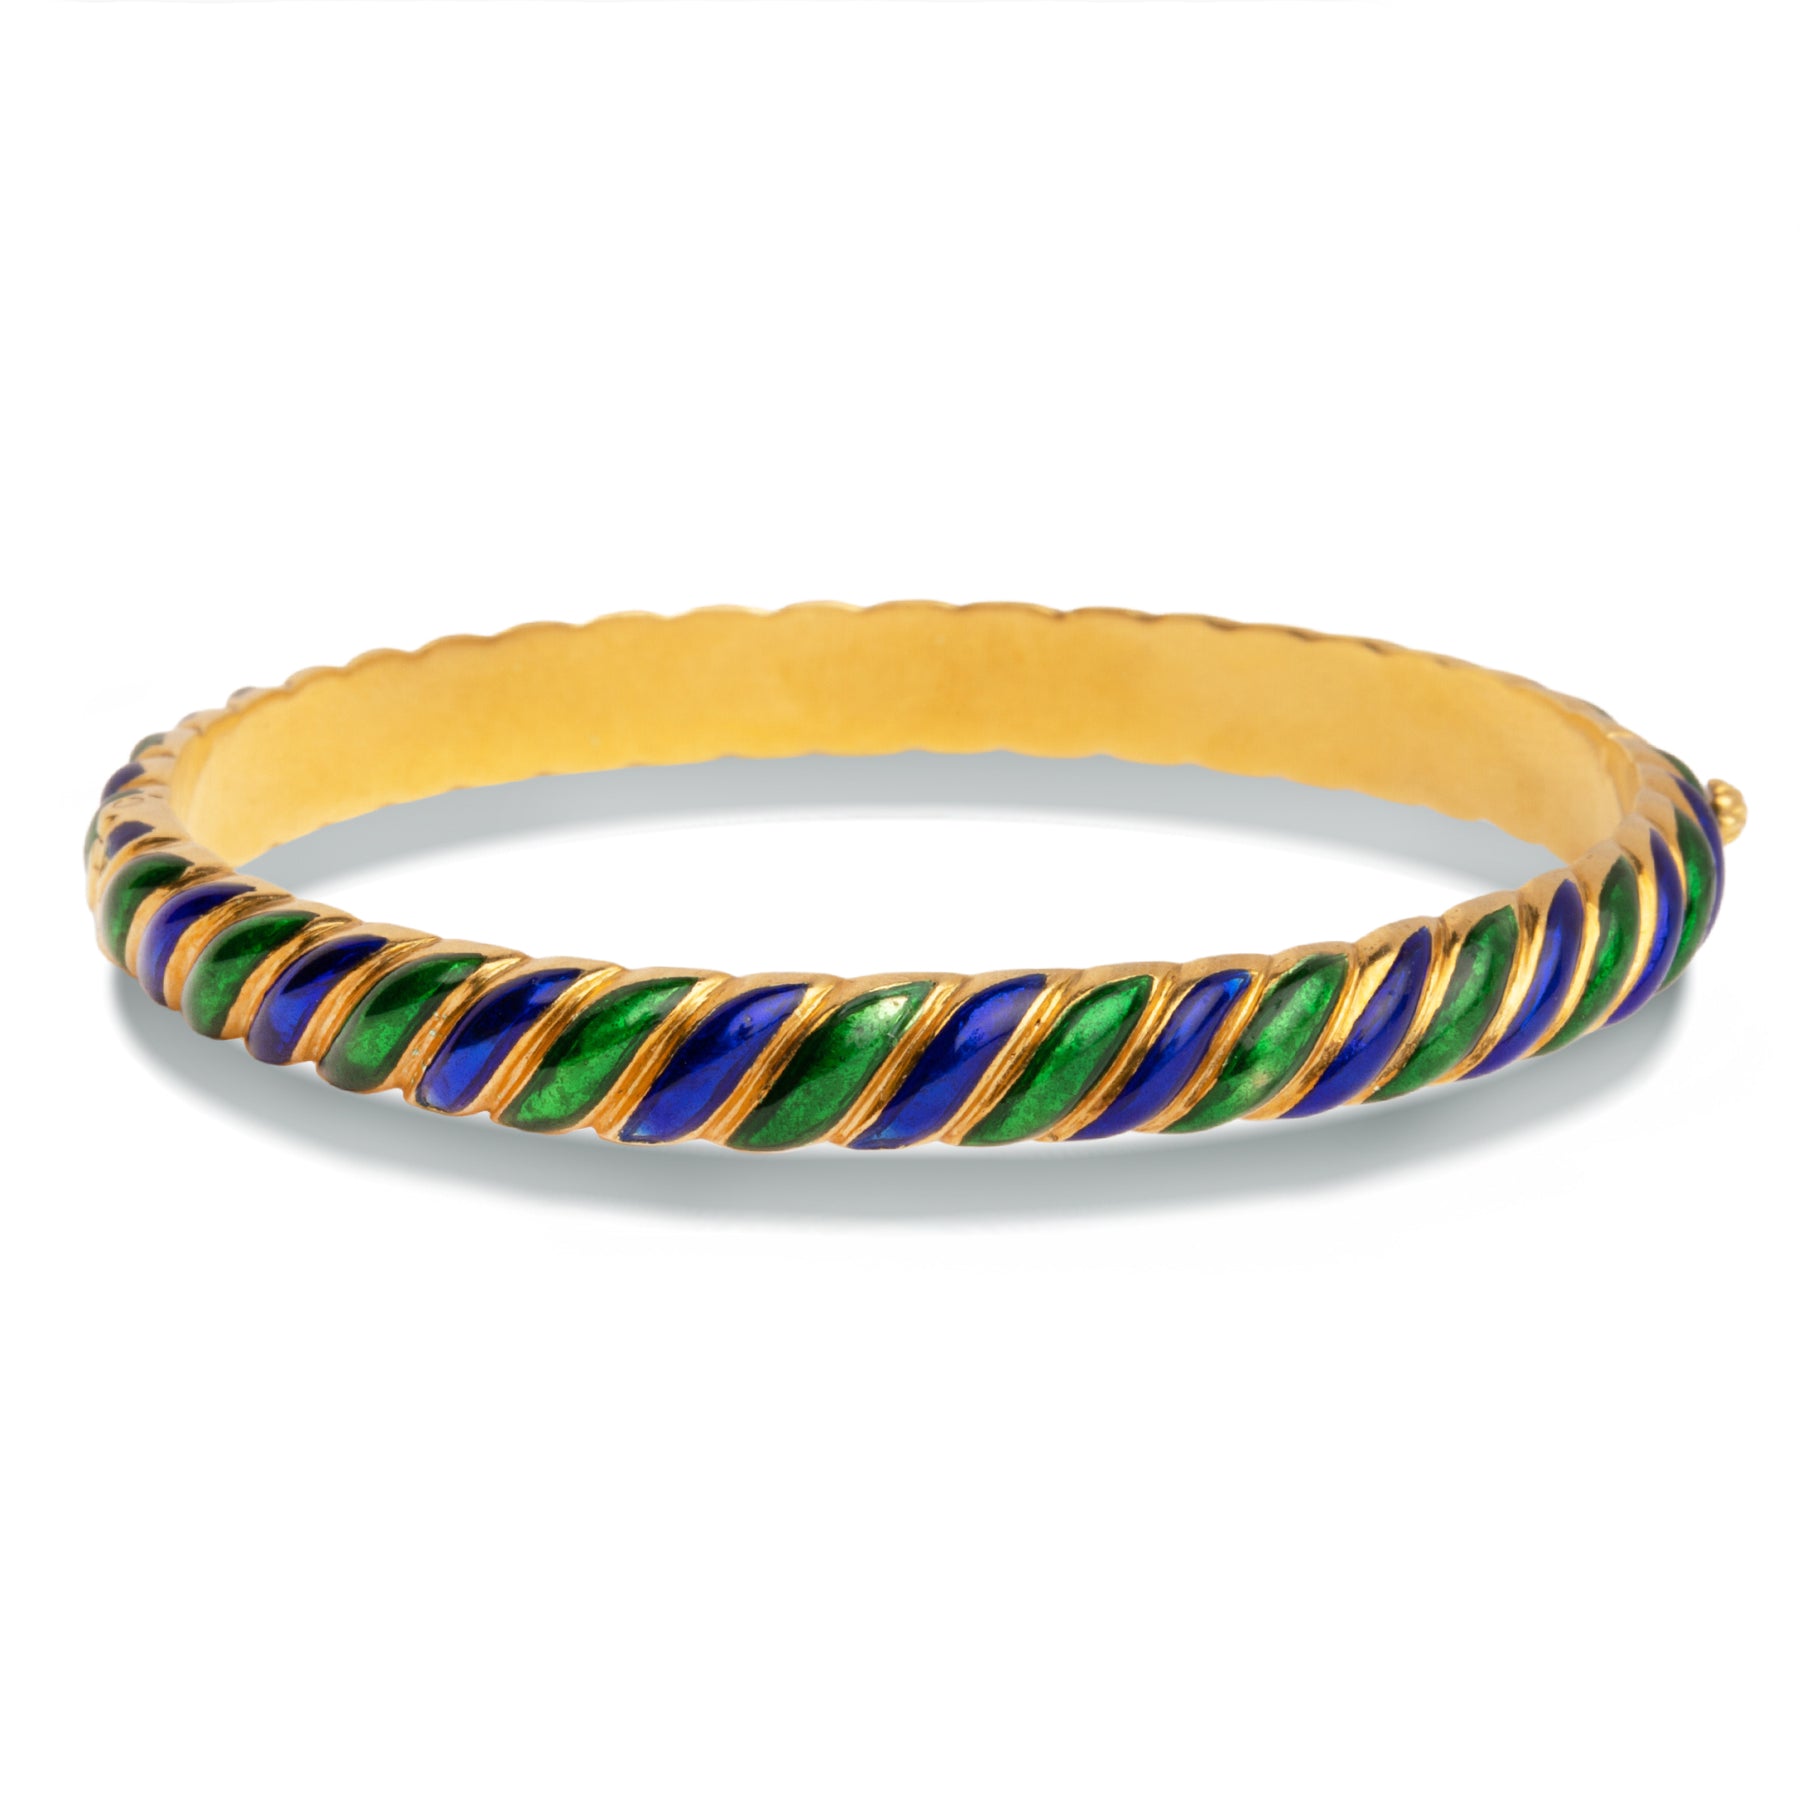 Contemporary Estate 14k yellow gold Enamel and Gold Multi Color Bangle